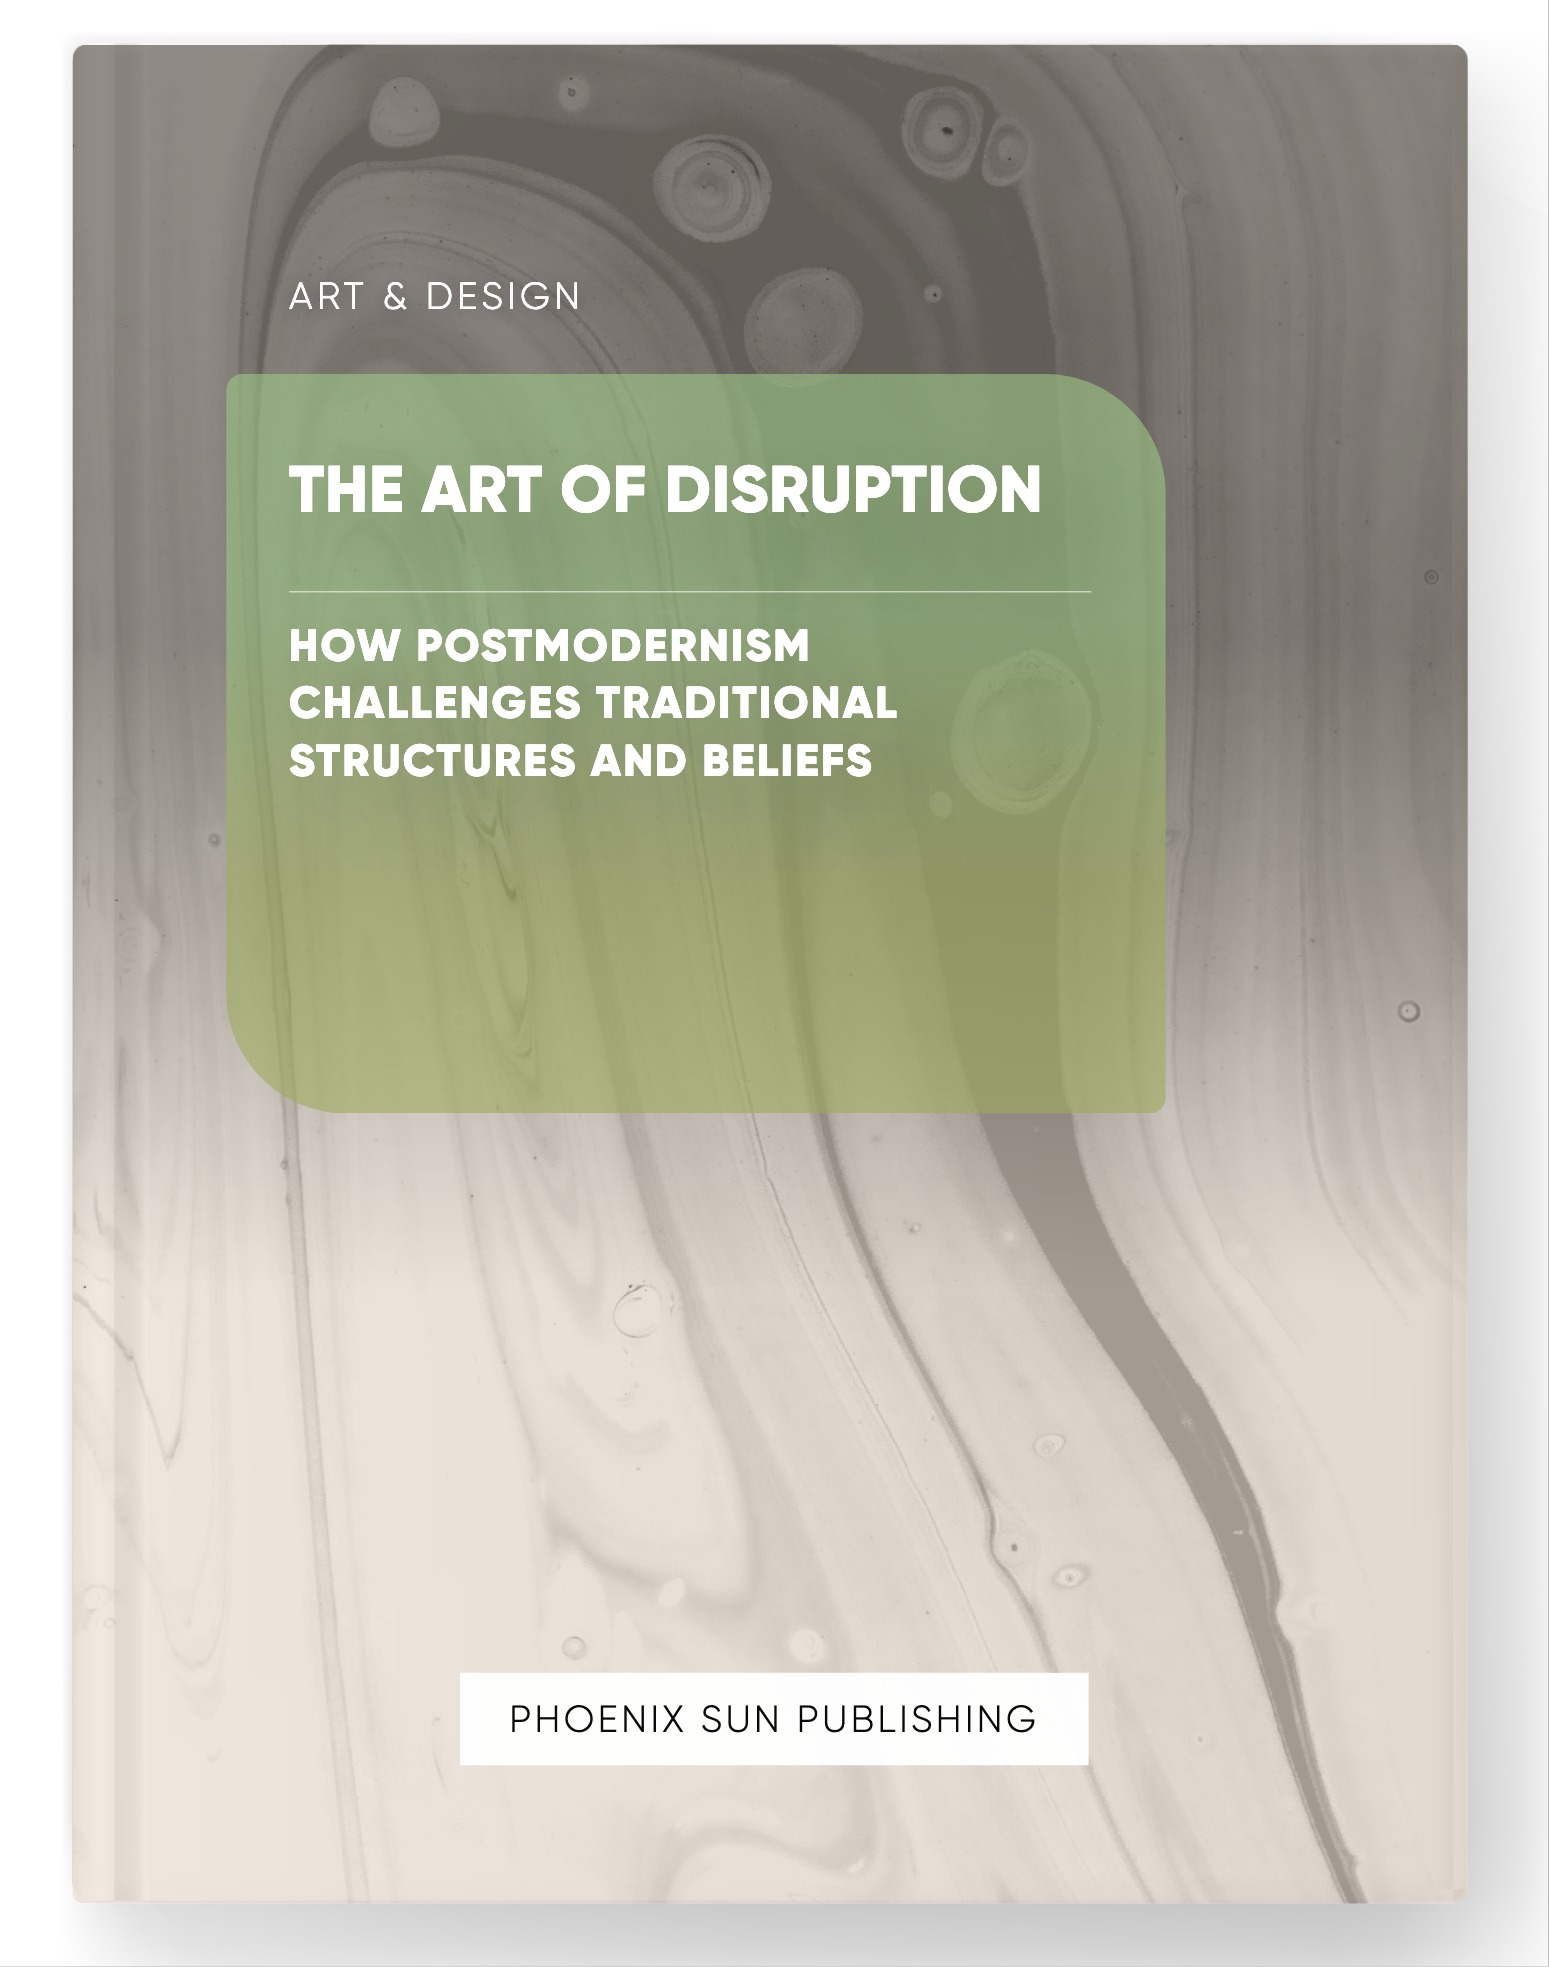 The Art of Disruption – How Postmodernism Challenges Traditional Structures and Beliefs